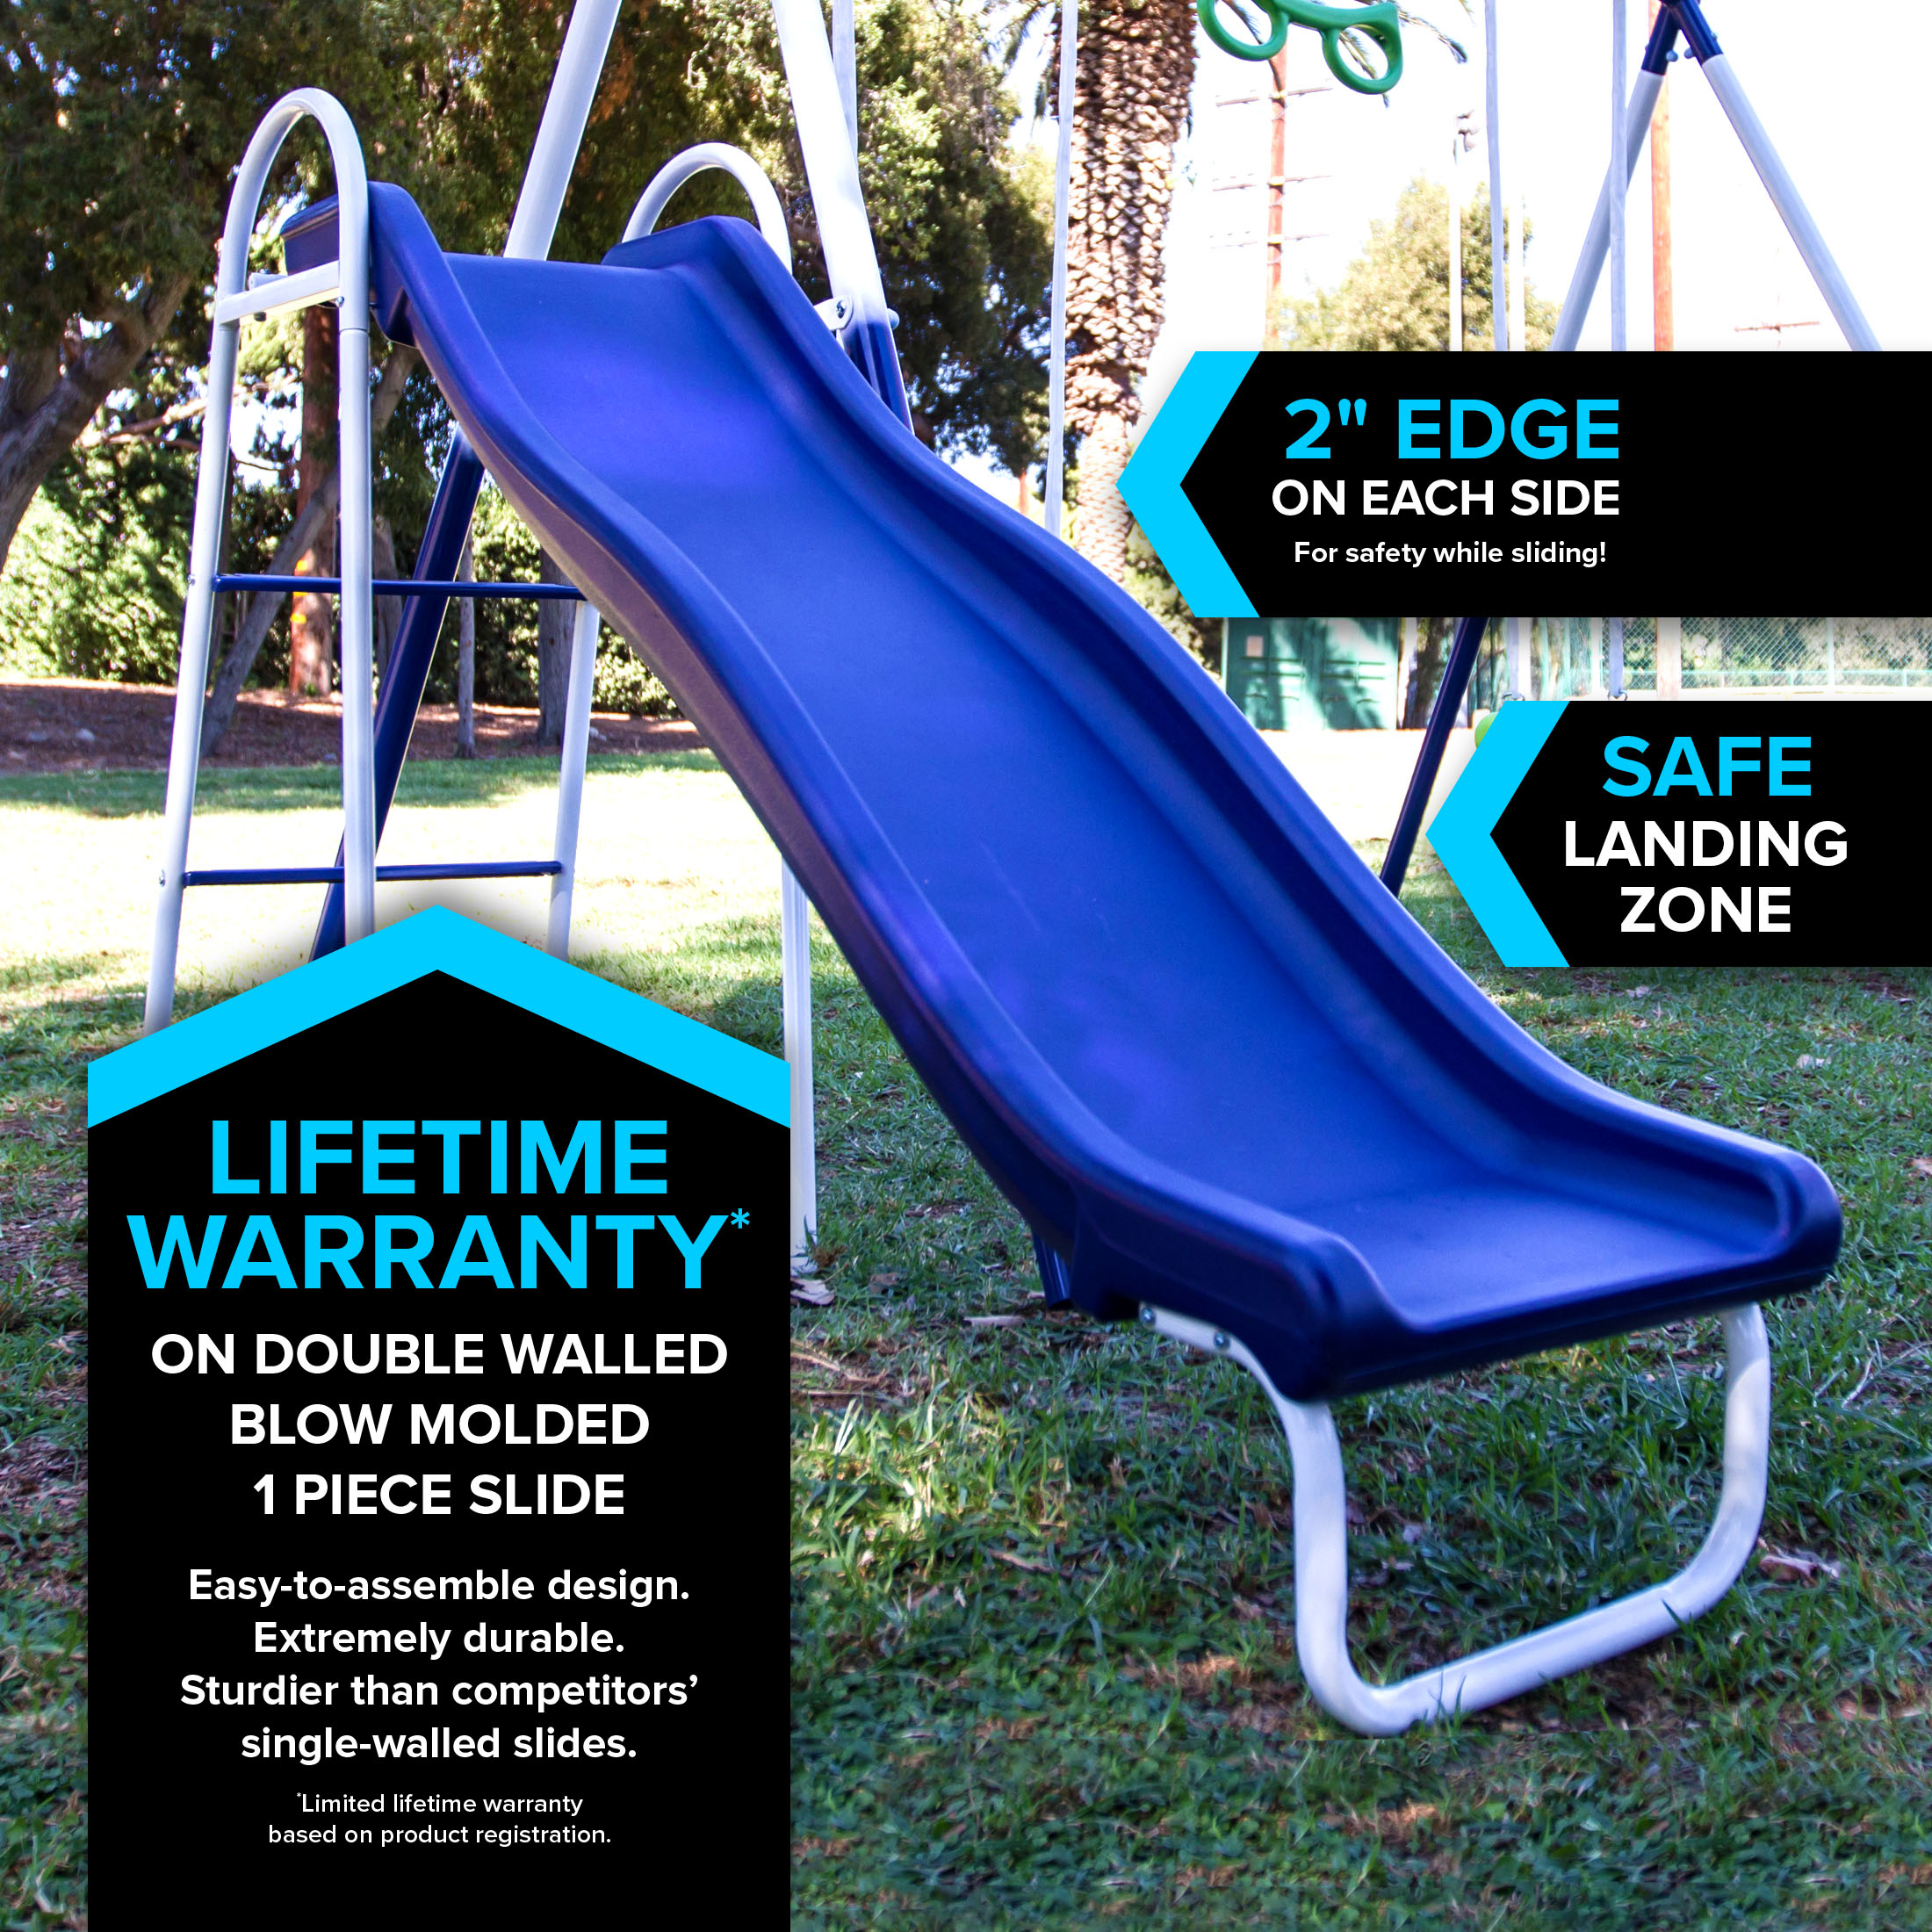 Sportspower Sierra Vista Outdoor Metal Swing Set with Trapeze, Lifetime Warranty on Blow Molded Slide, and Bonus Anchor Kit - image 5 of 12